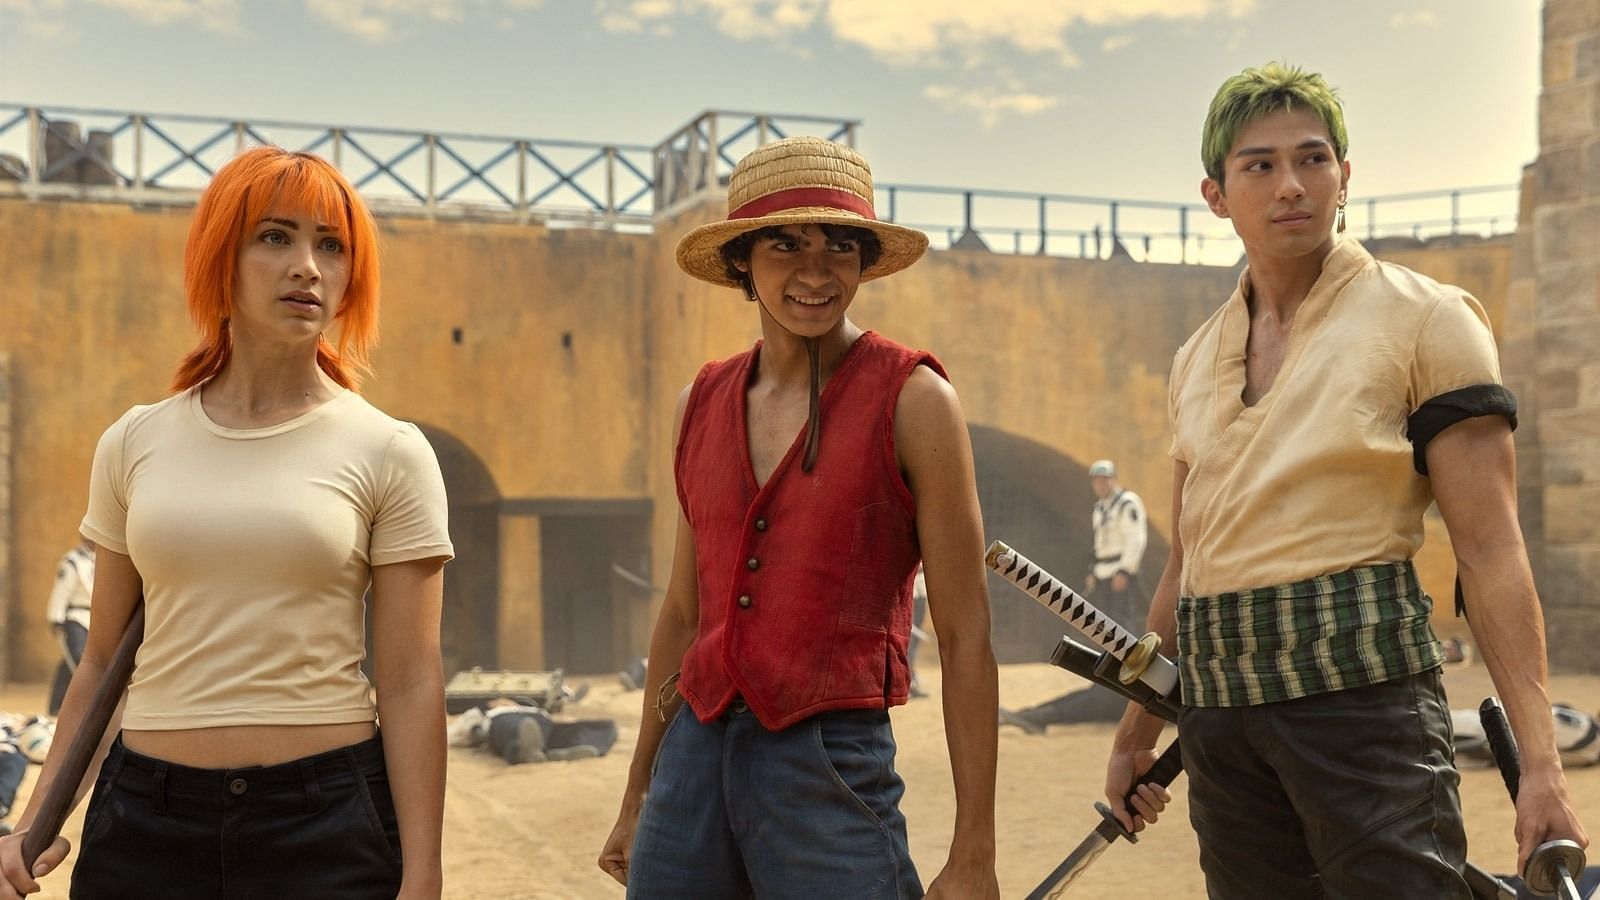 Nami, Luffy, and Zoro as seen in One Piece Live-Action (Image via Netflix)